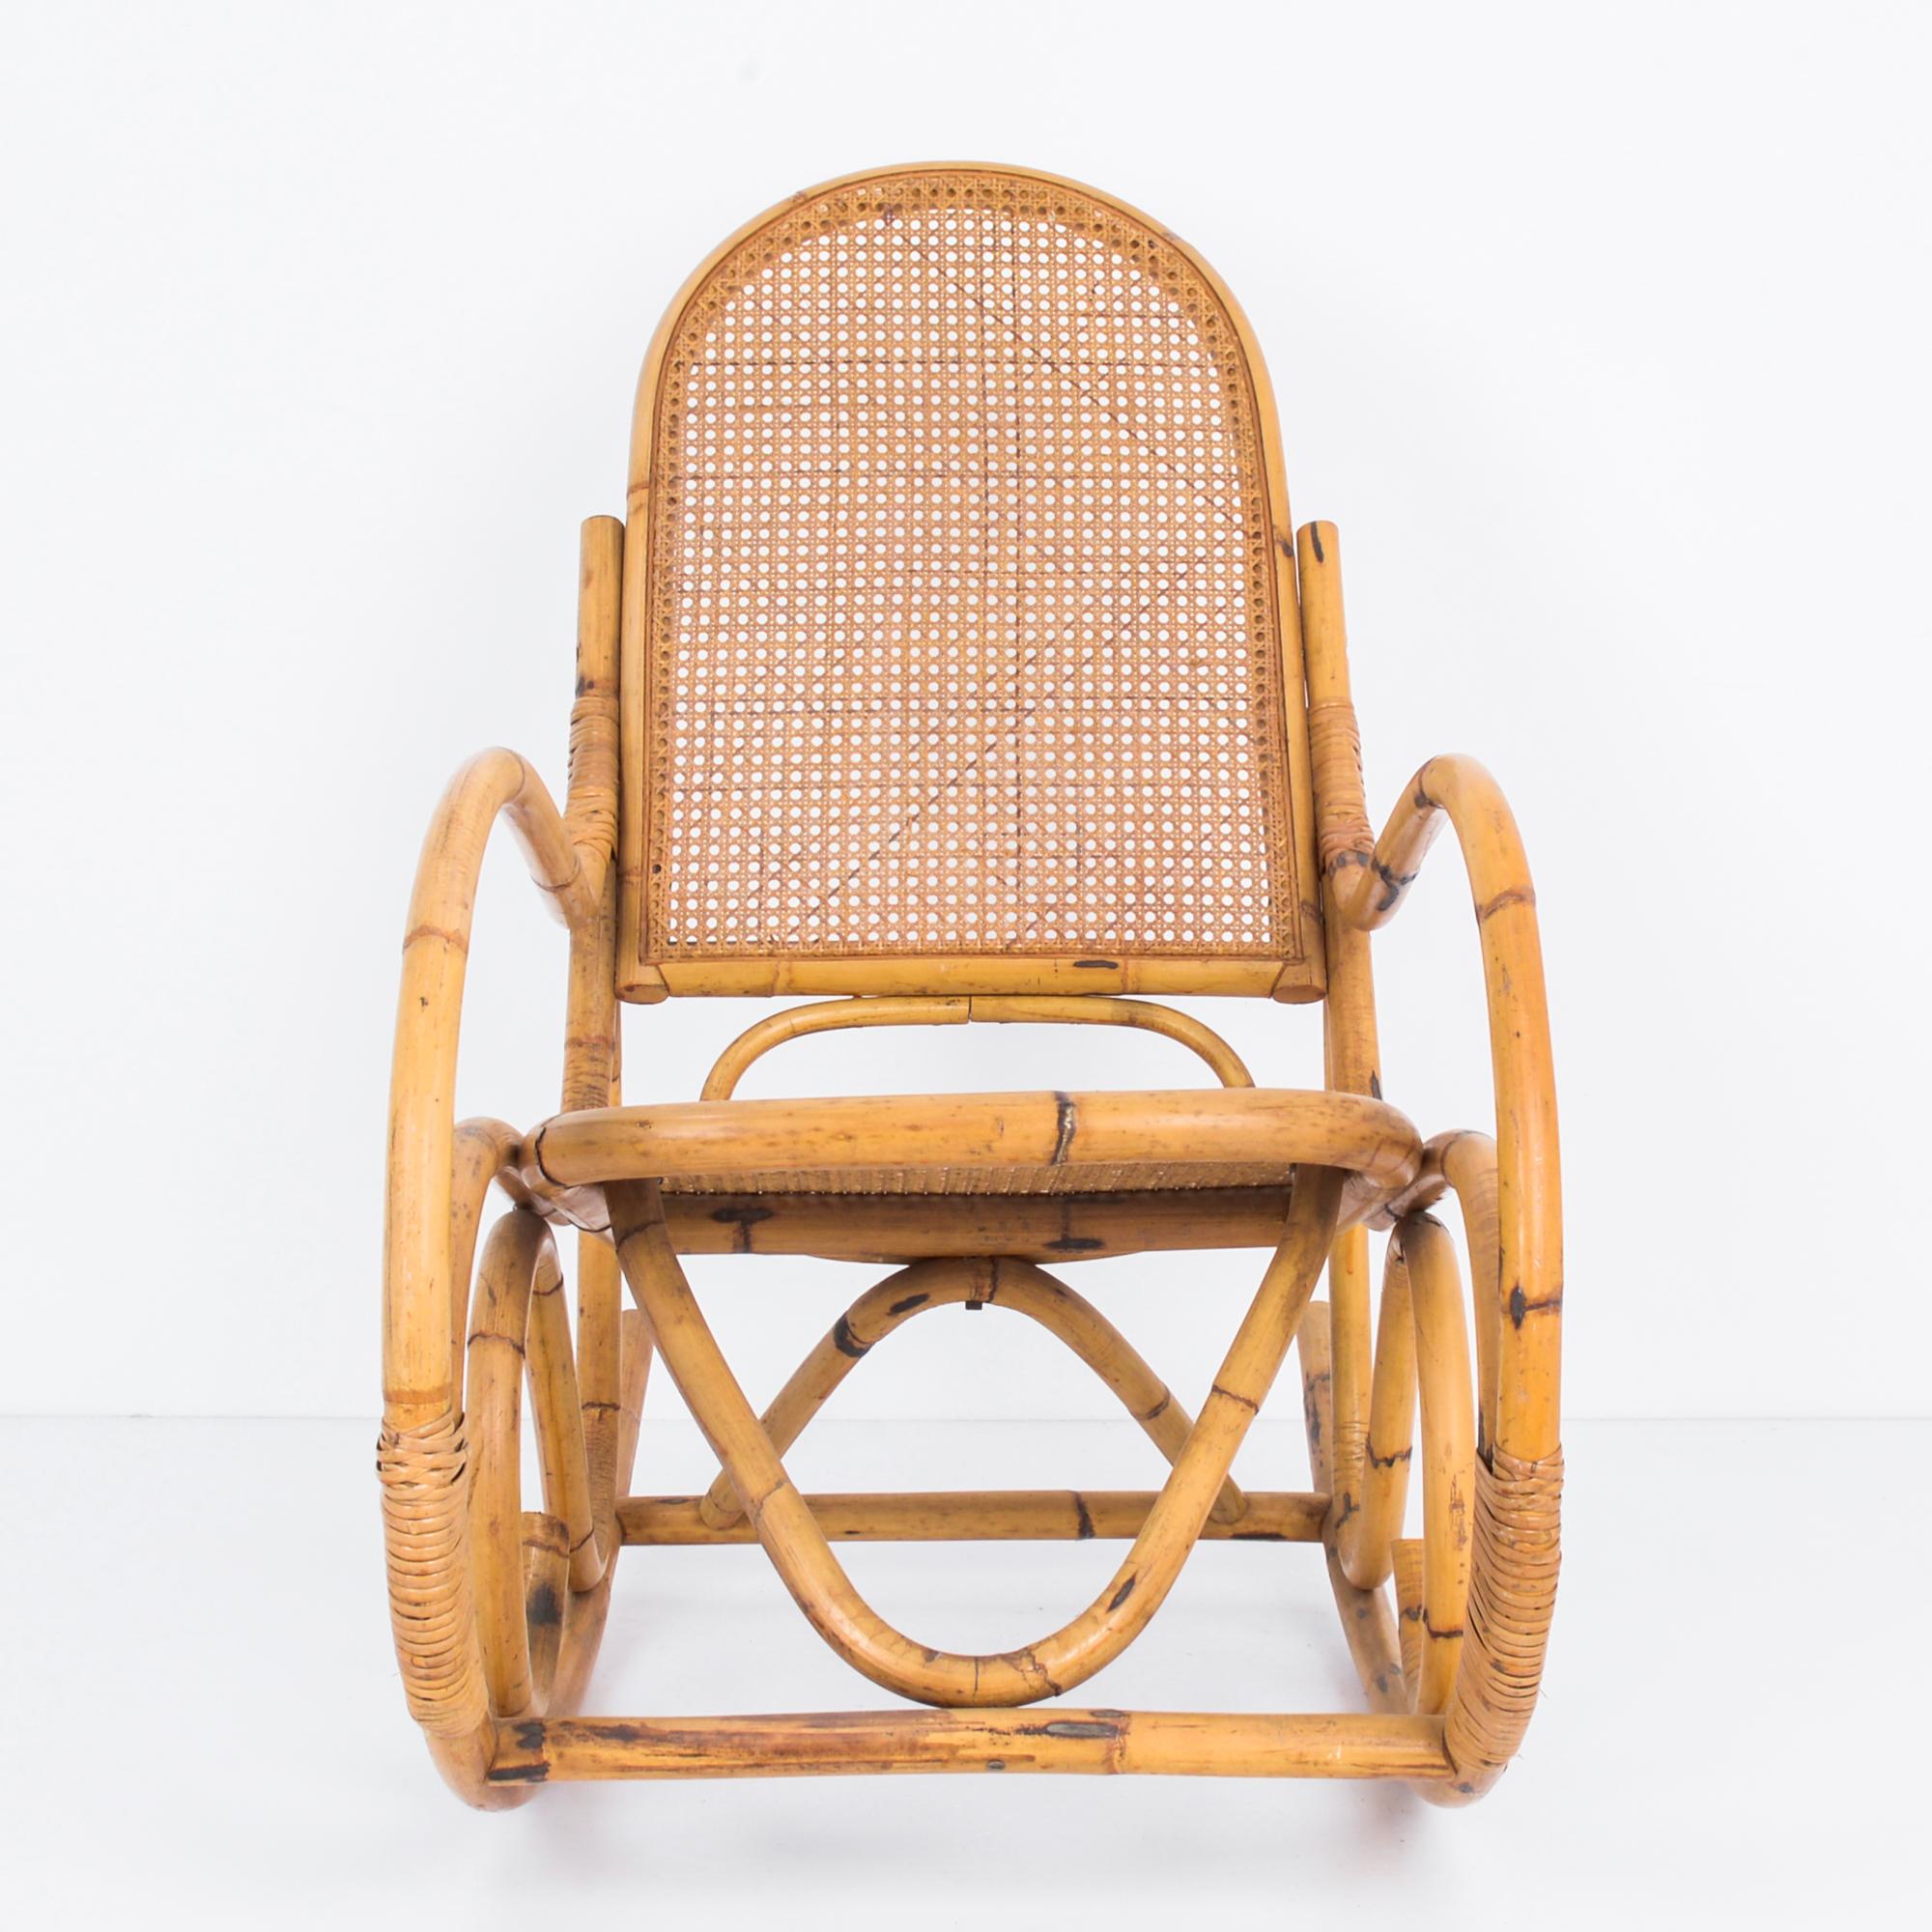 This rocking chair was made in France, circa 1960. Made of rattan, the chair reflects the Indochine style of using natural materials to update the bentwood rocking chairs produced in Europe from the late 19th century-- a reference to makers the